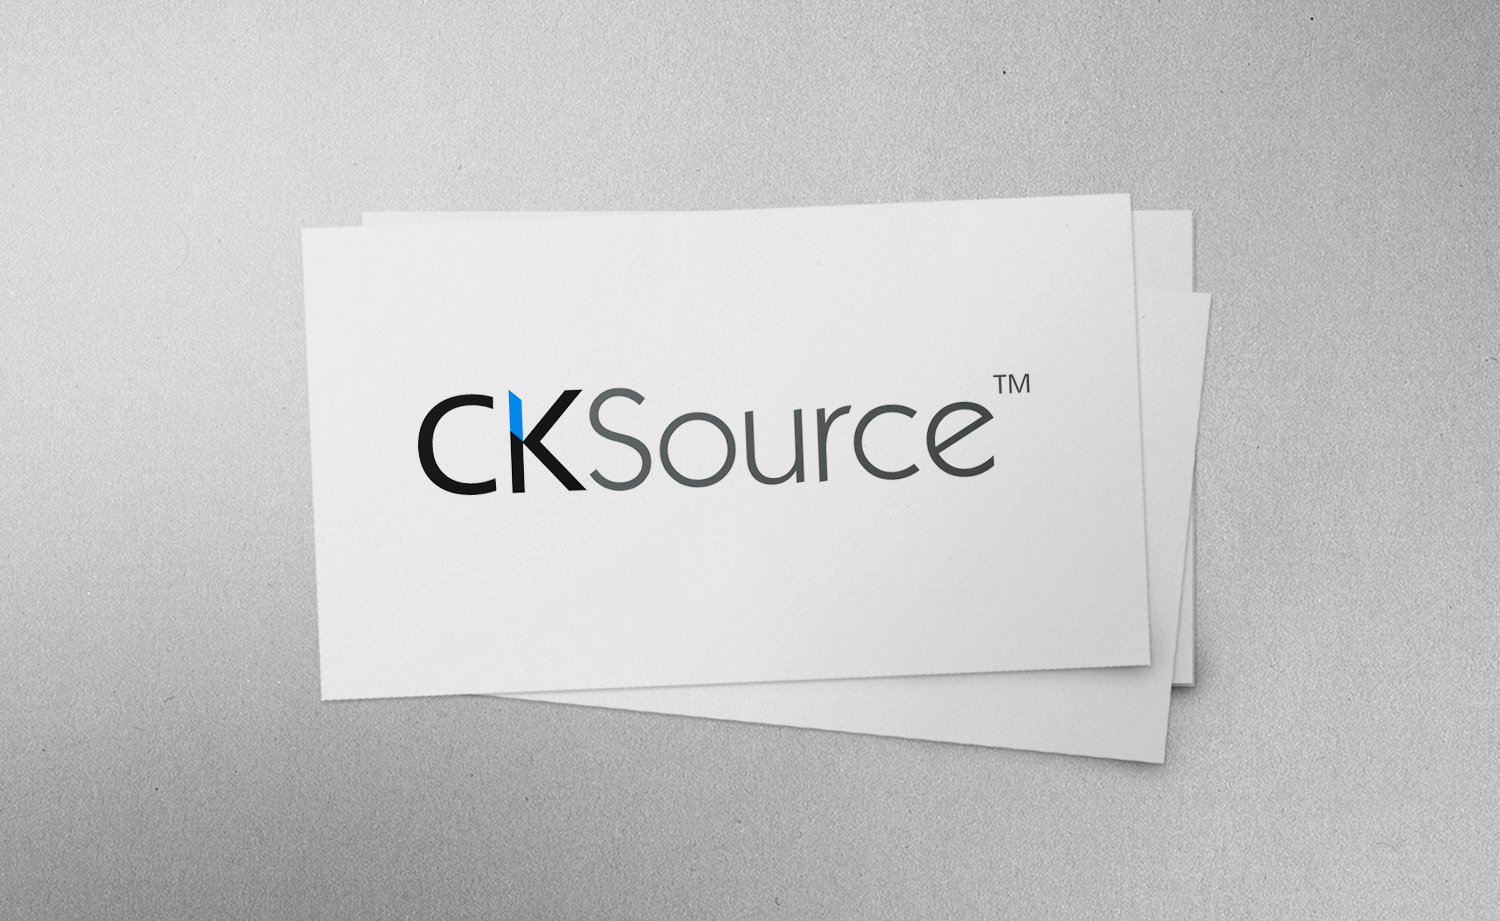 BPR carries out an international project for CKSource